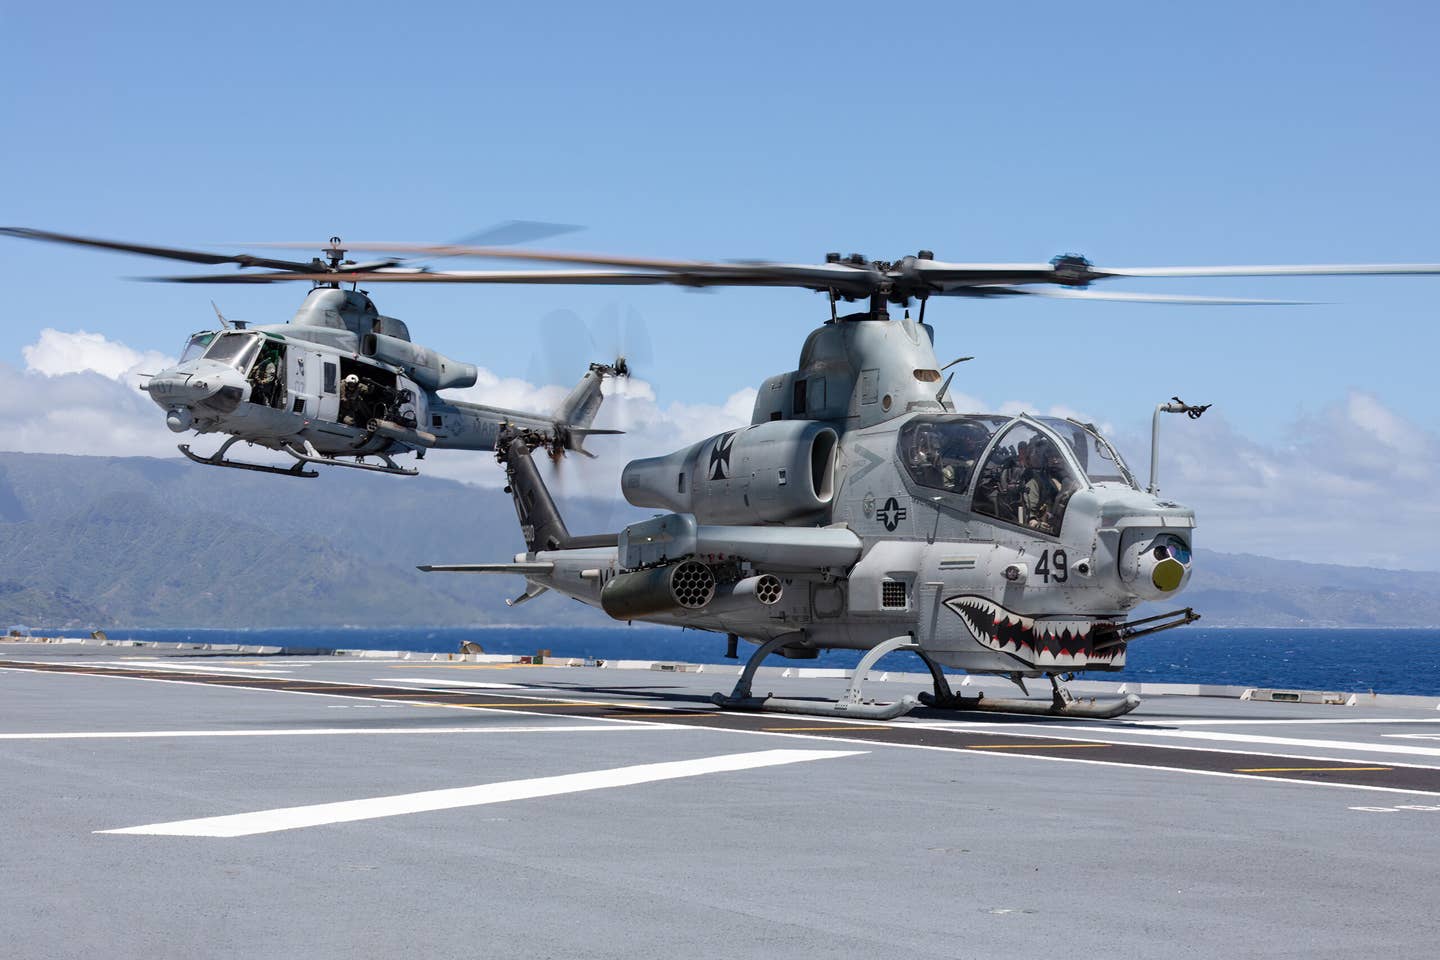 A U.S. Marine Corps UH-1Y Venom helicopter prepares to land beside a U.S. Marine Corps AH-1Z Viper helicopter on the flight deck of Royal Australian Navy Canberra-class landing helicopter dock HMAS Canberra. <em>Photo by Royal Australian Navy Leading Seaman Matthew Lyall</em>